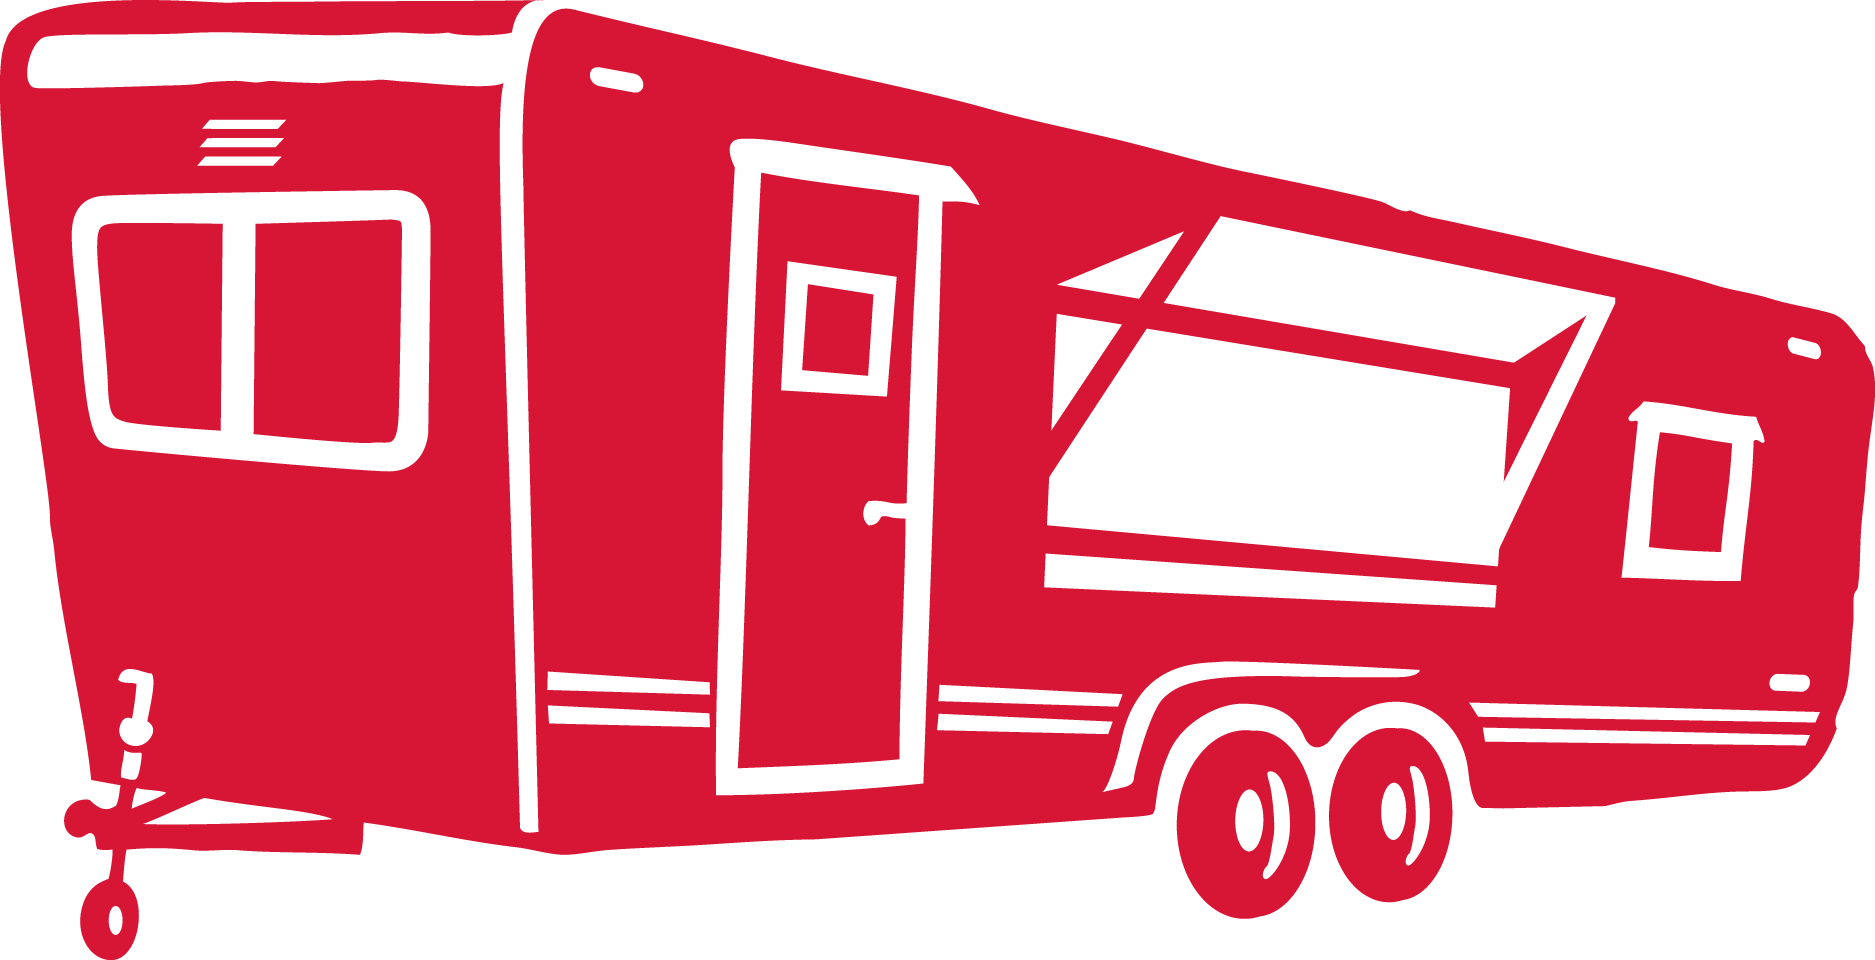 Food Trucks And Trailers How To Draw A Truck And Trailer - Hat Creek Burger (1875x960)